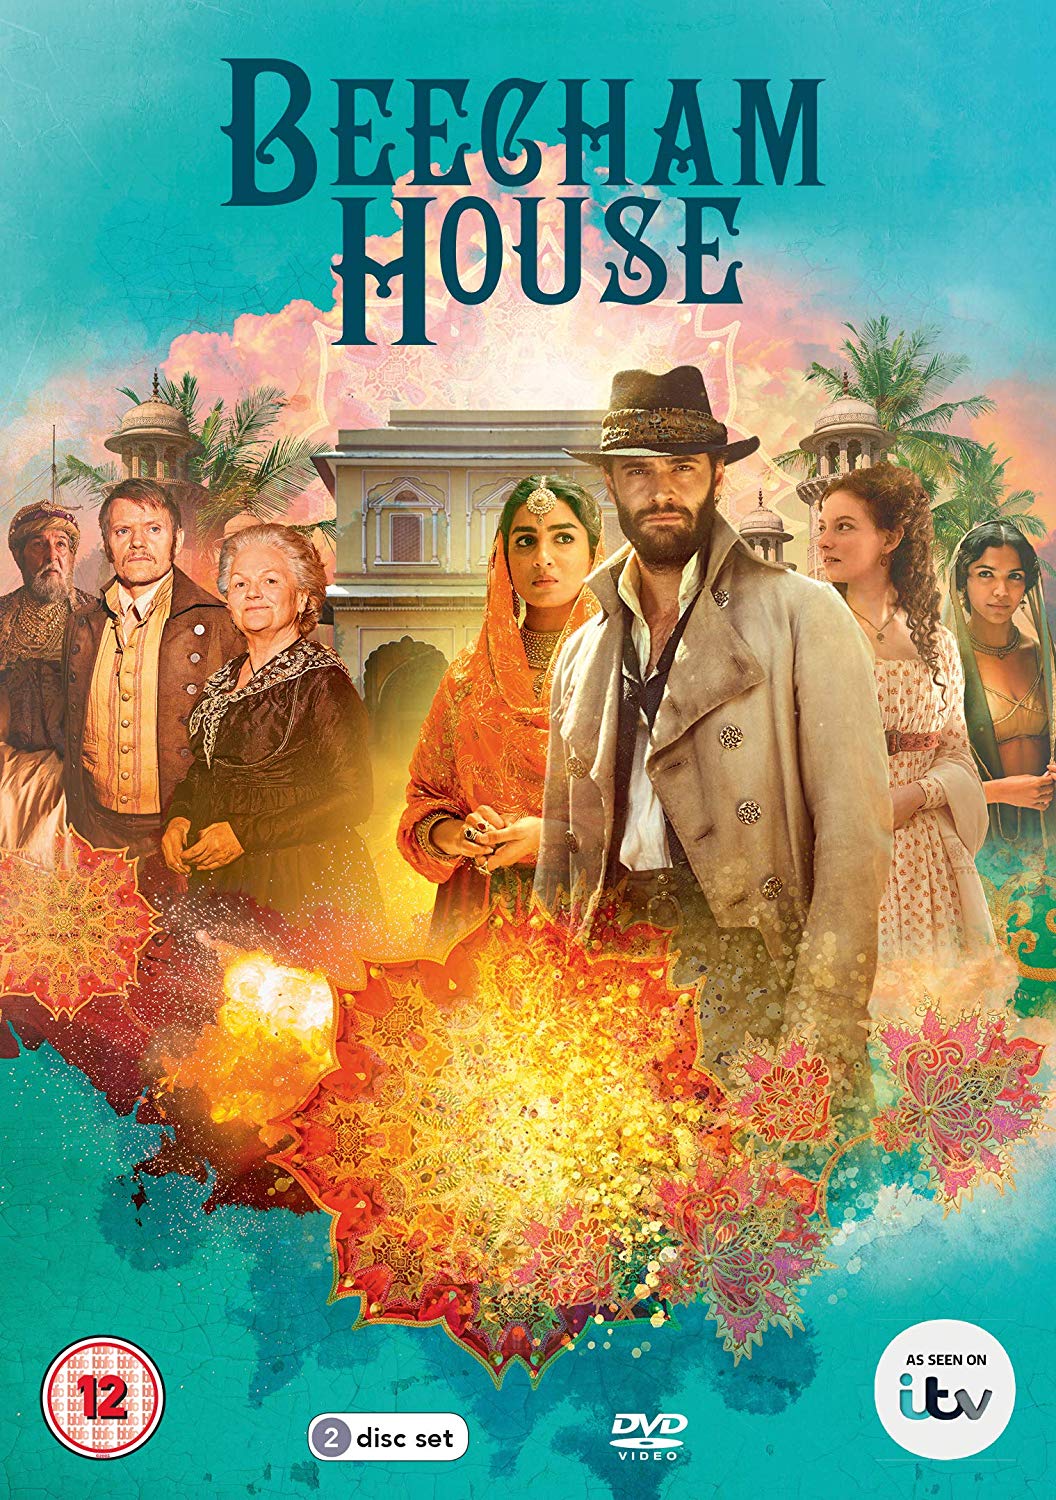 boom competitions - Beecham House